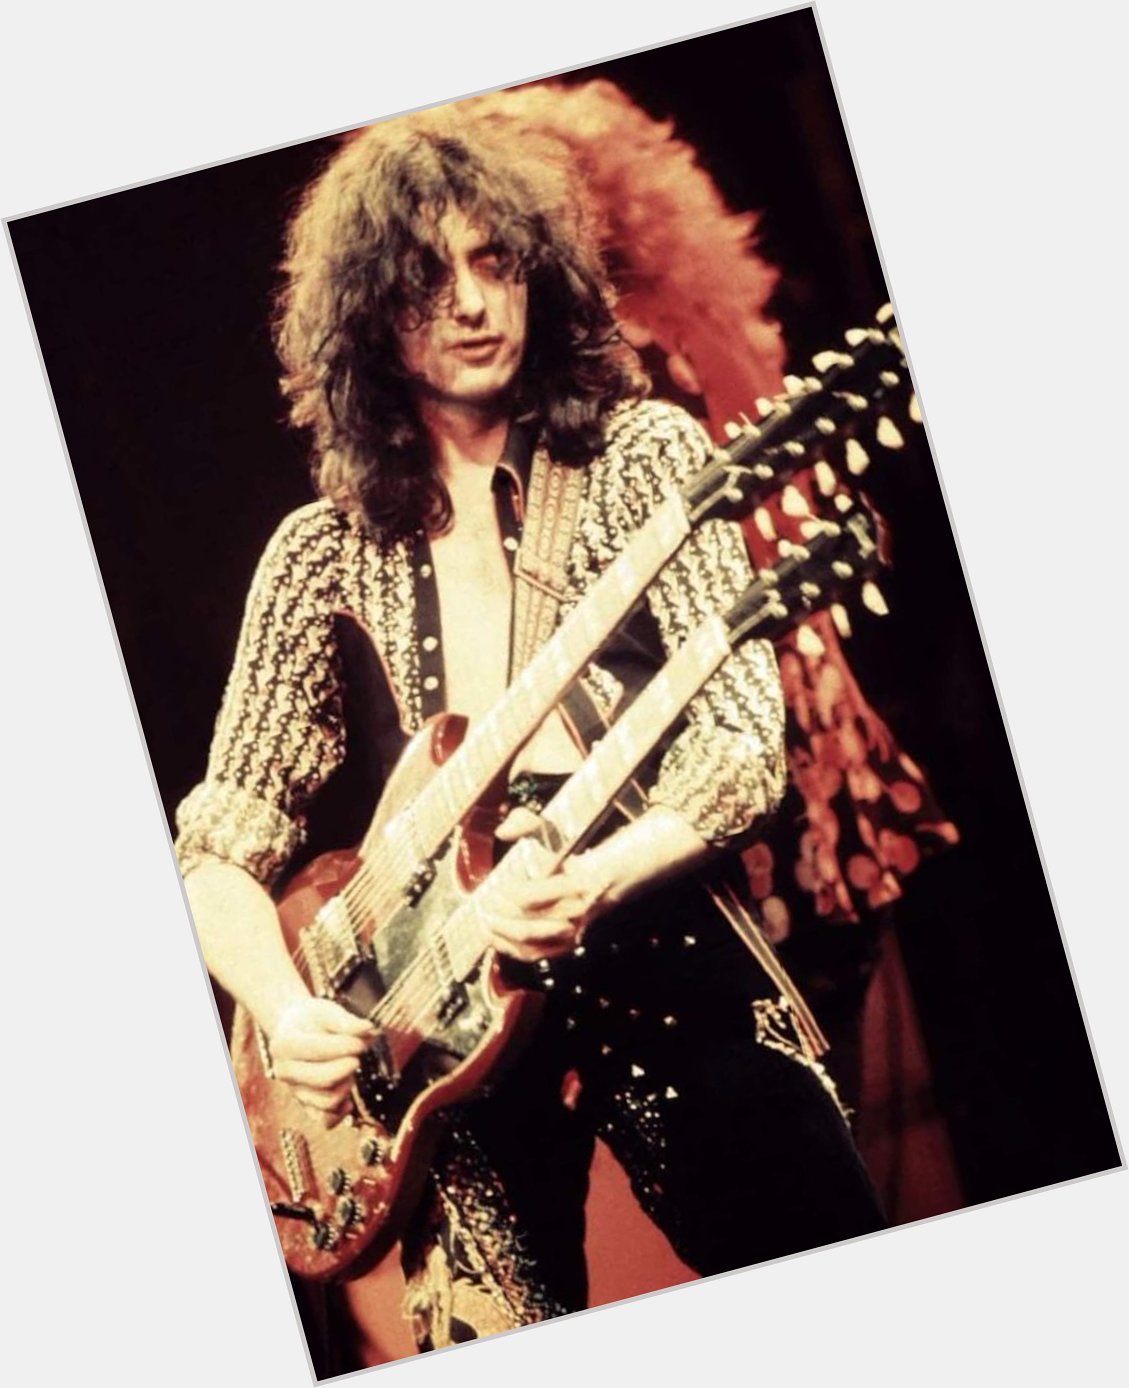 Happy 79th Birthday to guitar great Jimmy Page! 